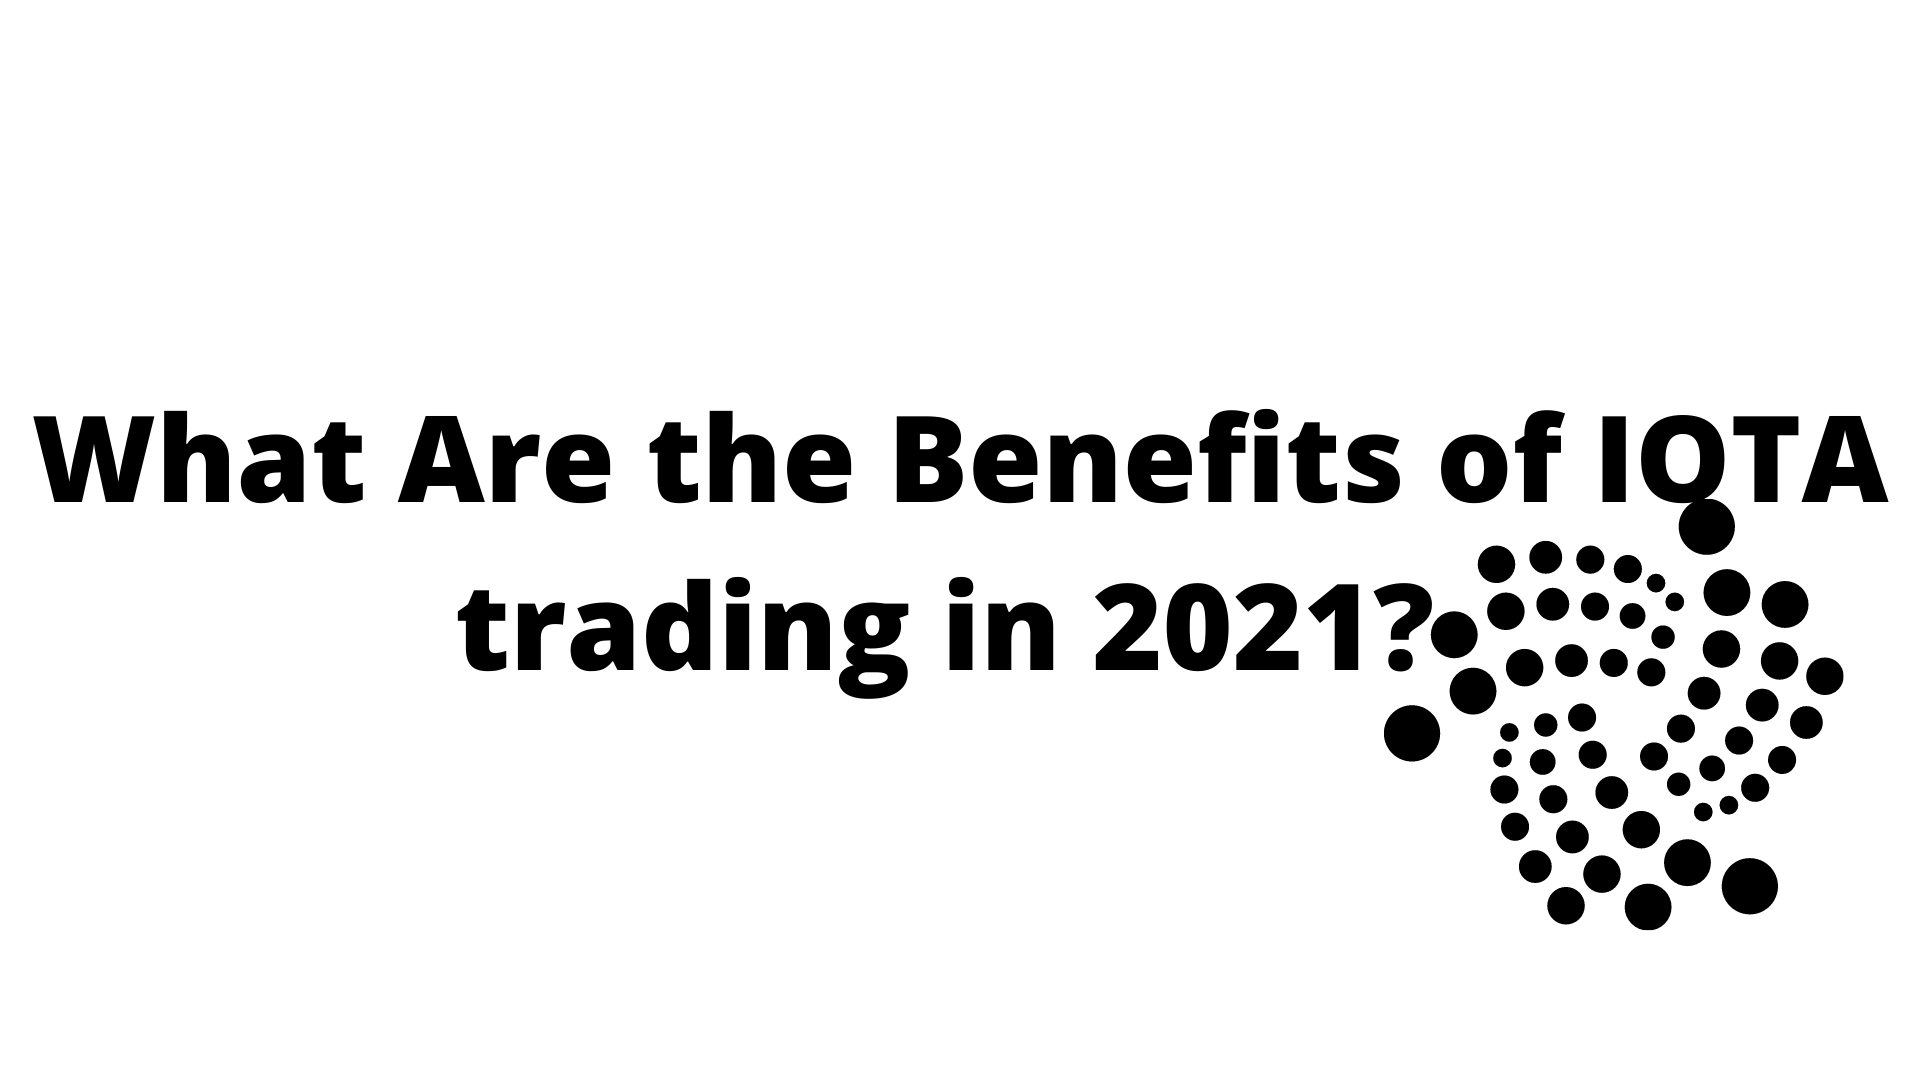 What Are the Benefits of IOTA trading?